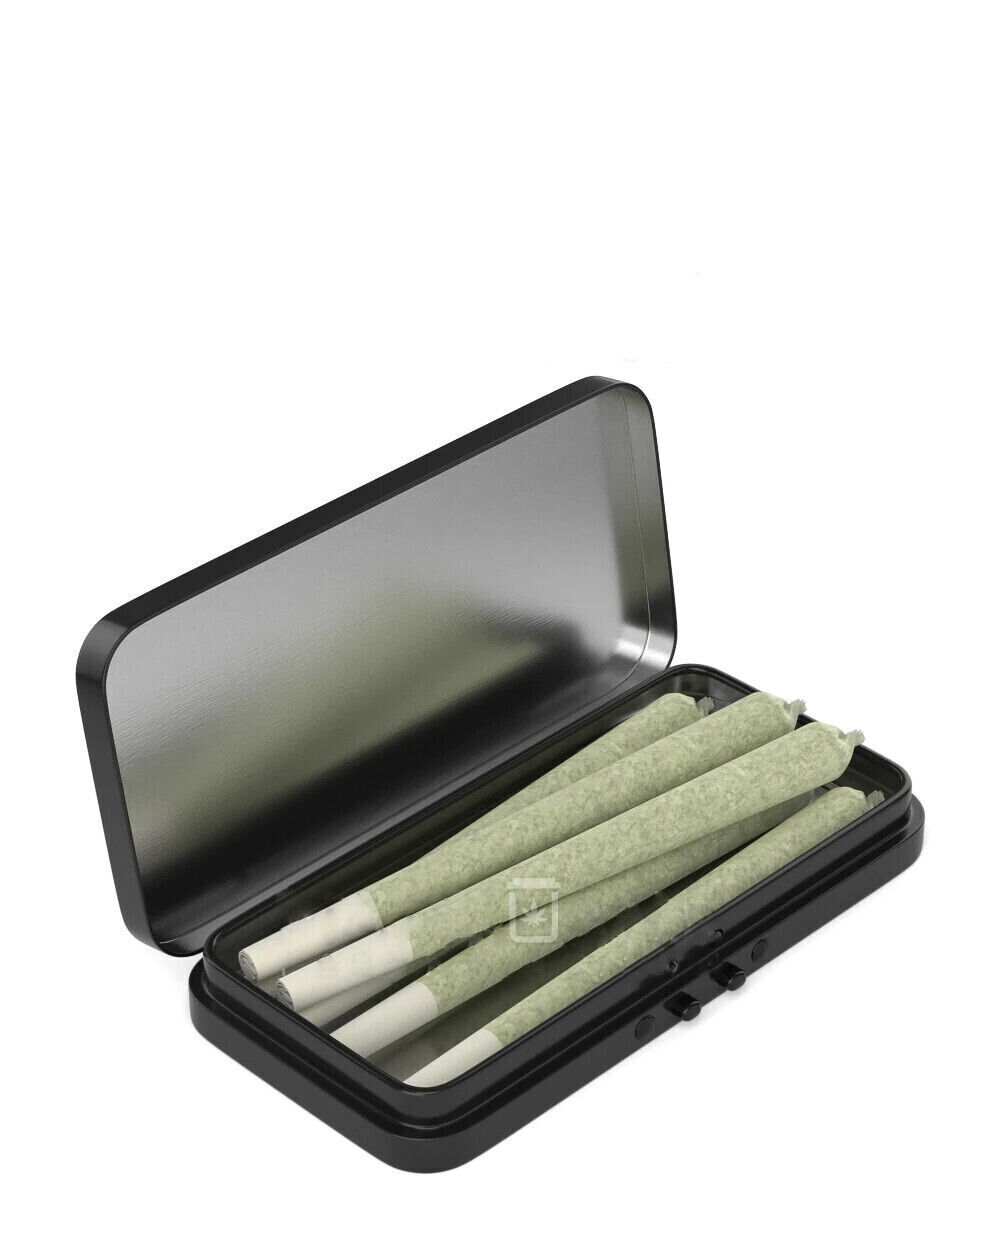 Tin Box CHILD RESISTANT and AIR-TIGHT PRE-ROLL JOINT CASE Hinged-Lid BLACK NEW